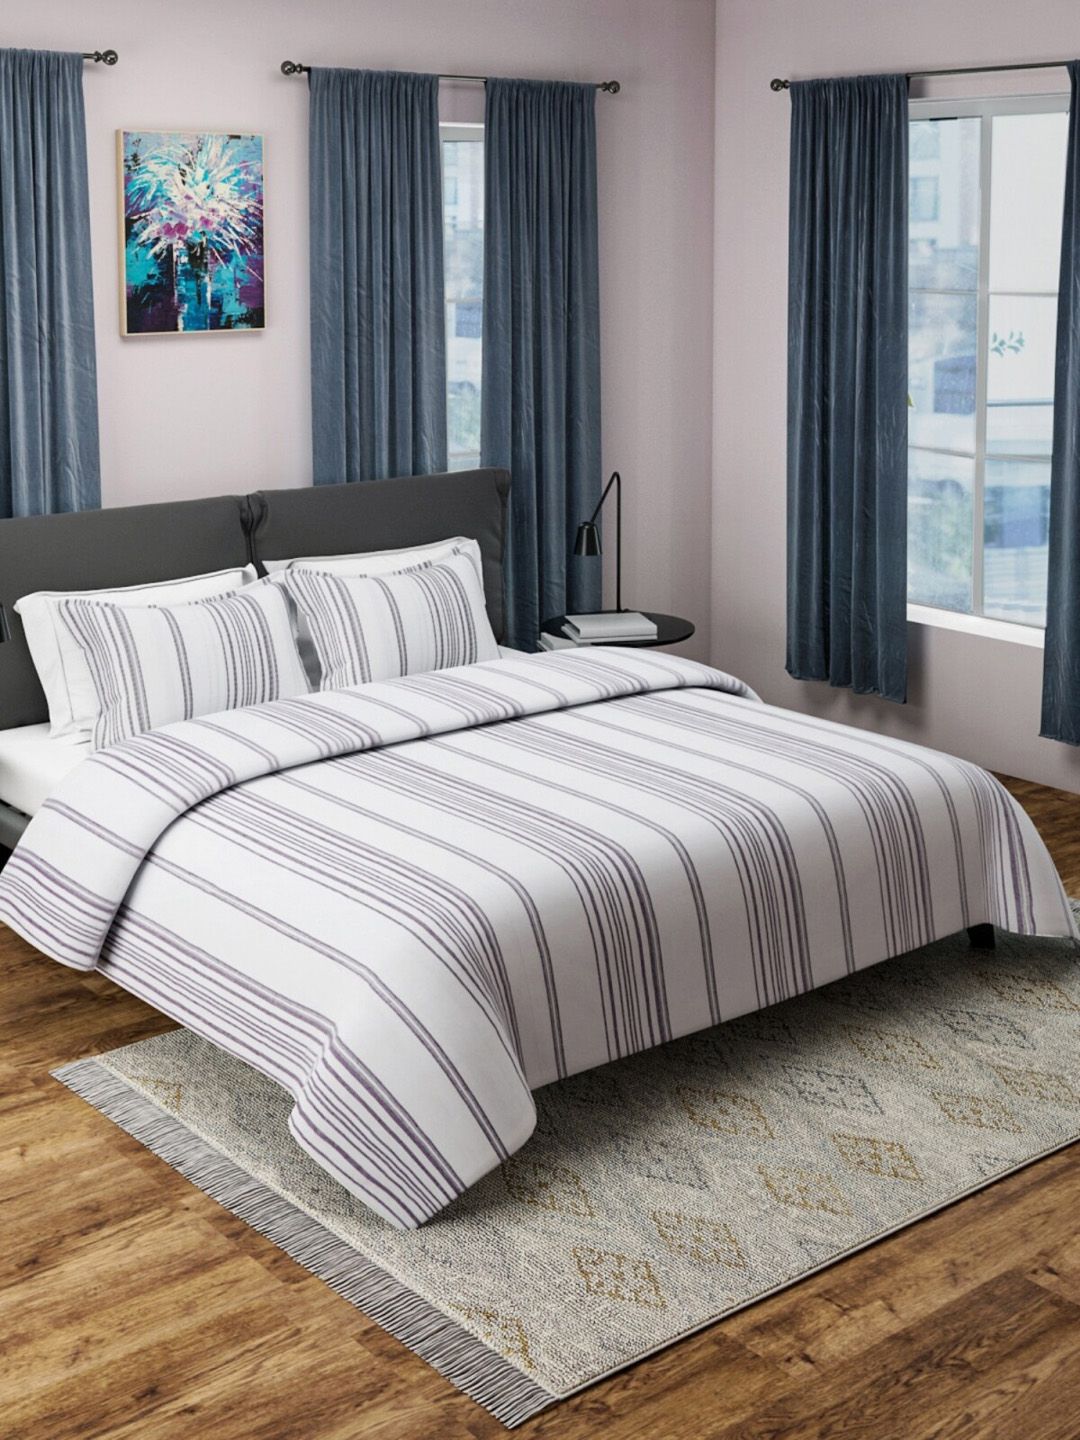 ROMEE Grey & White Striped Cotton Double Bed Cover With Pillow Cover Price in India